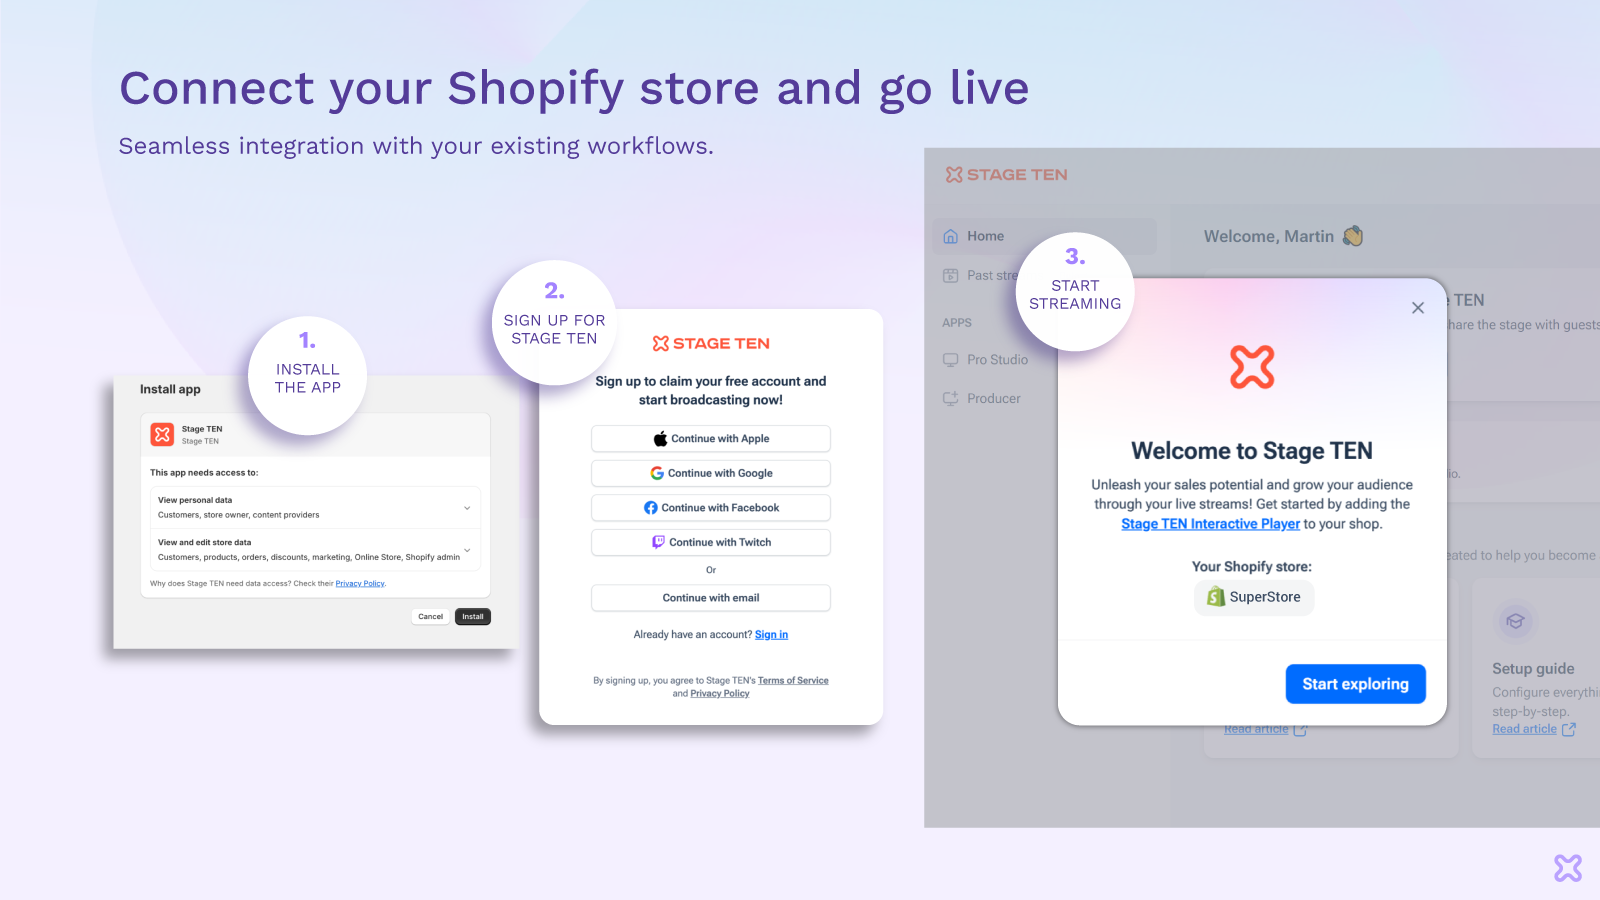 Connect your Shopify store and go live